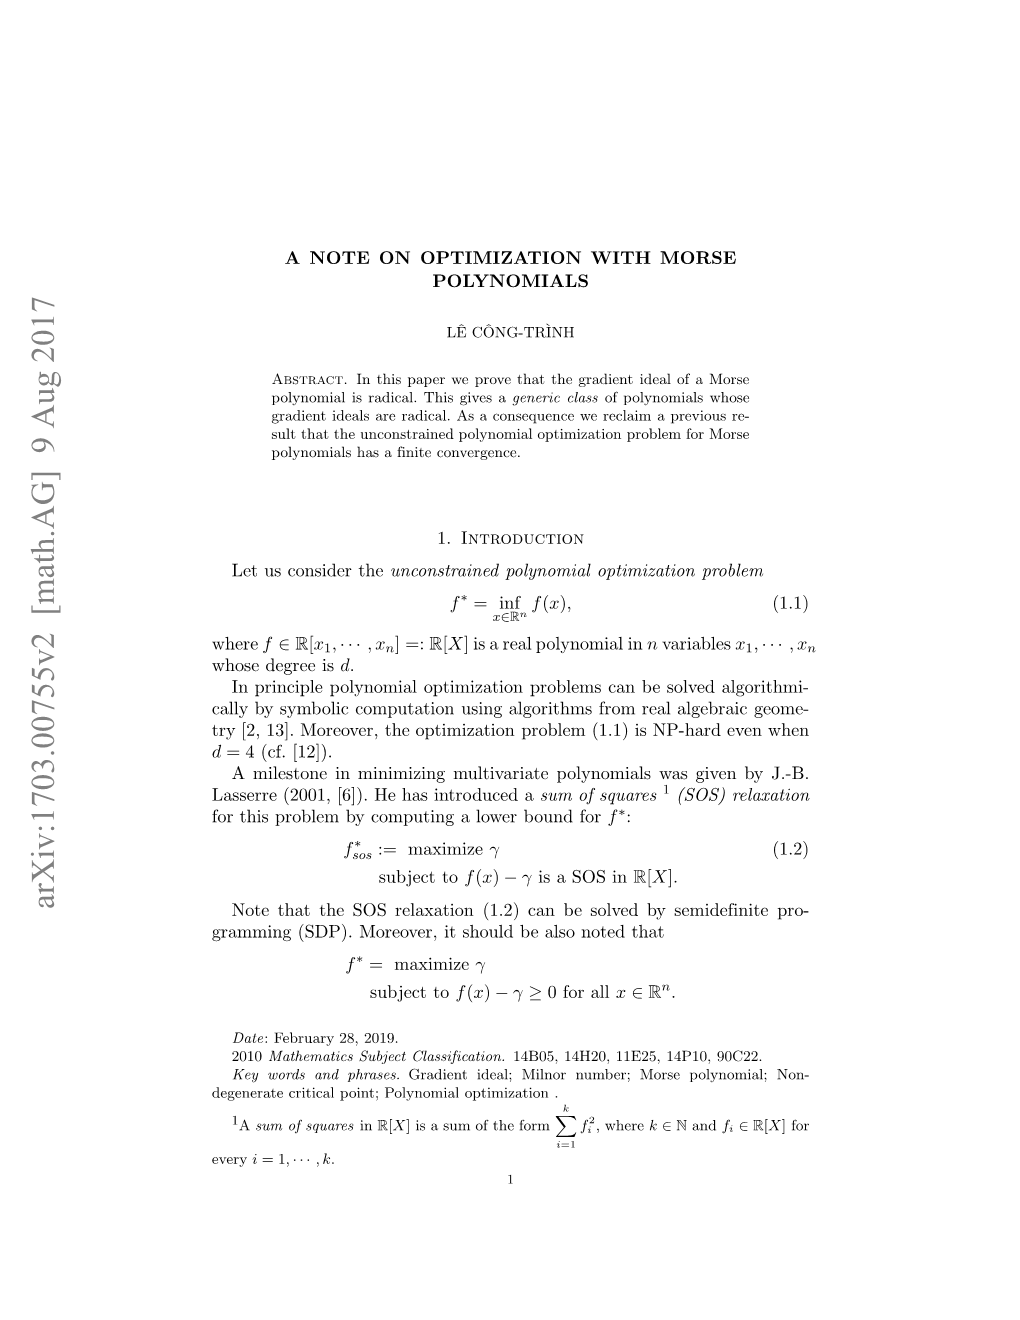 A NOTE on OPTIMIZATION with MORSE POLYNOMIALS 3 with Distinct Critical Values